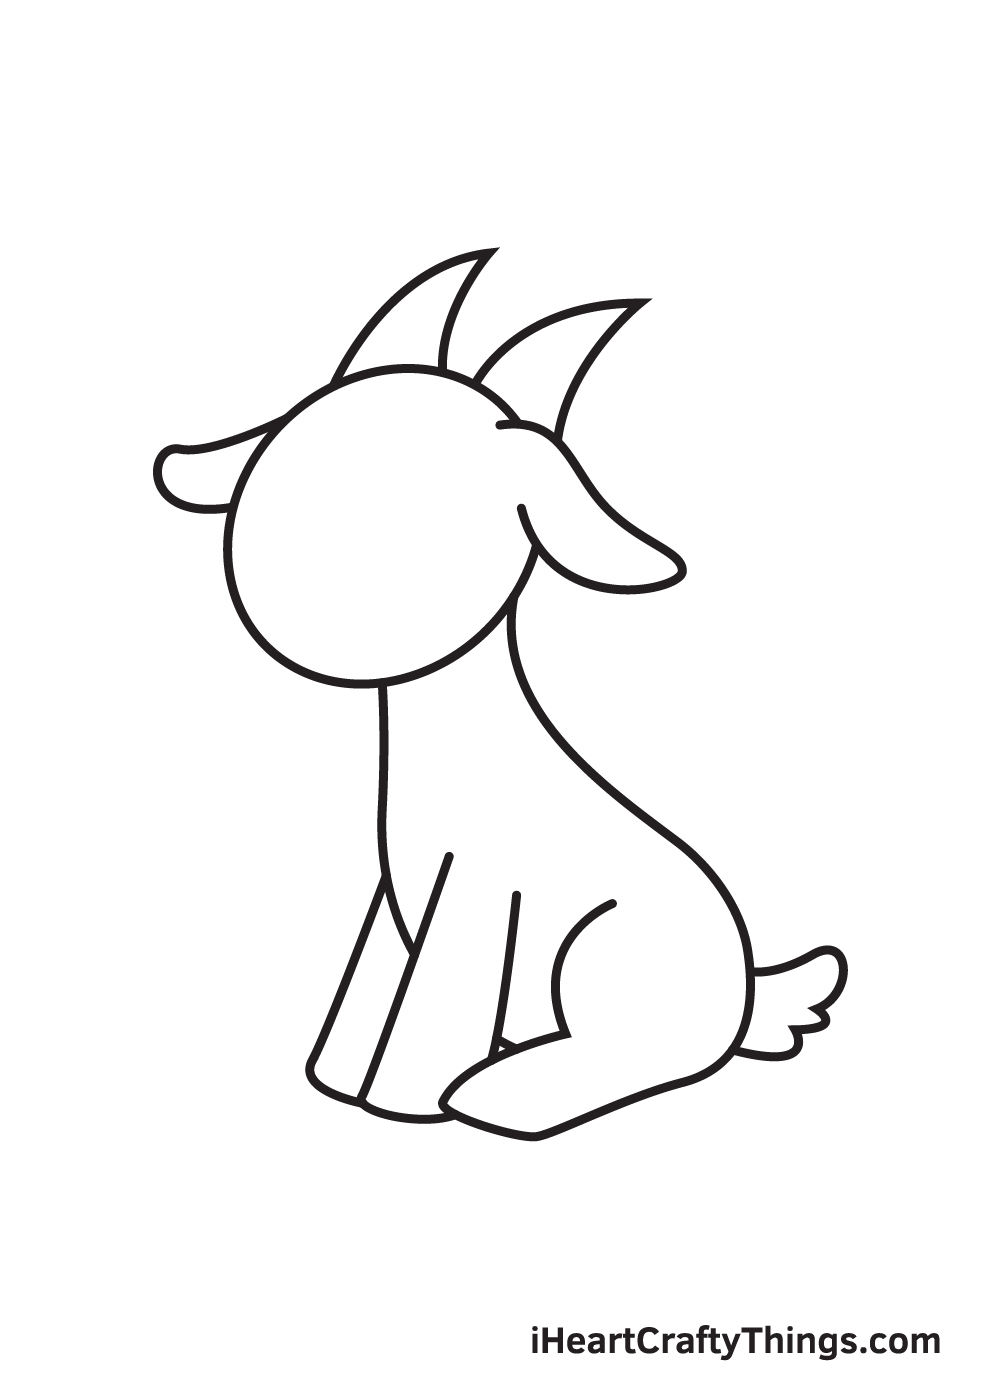 Goat Coloring Pages - Free & Printable!